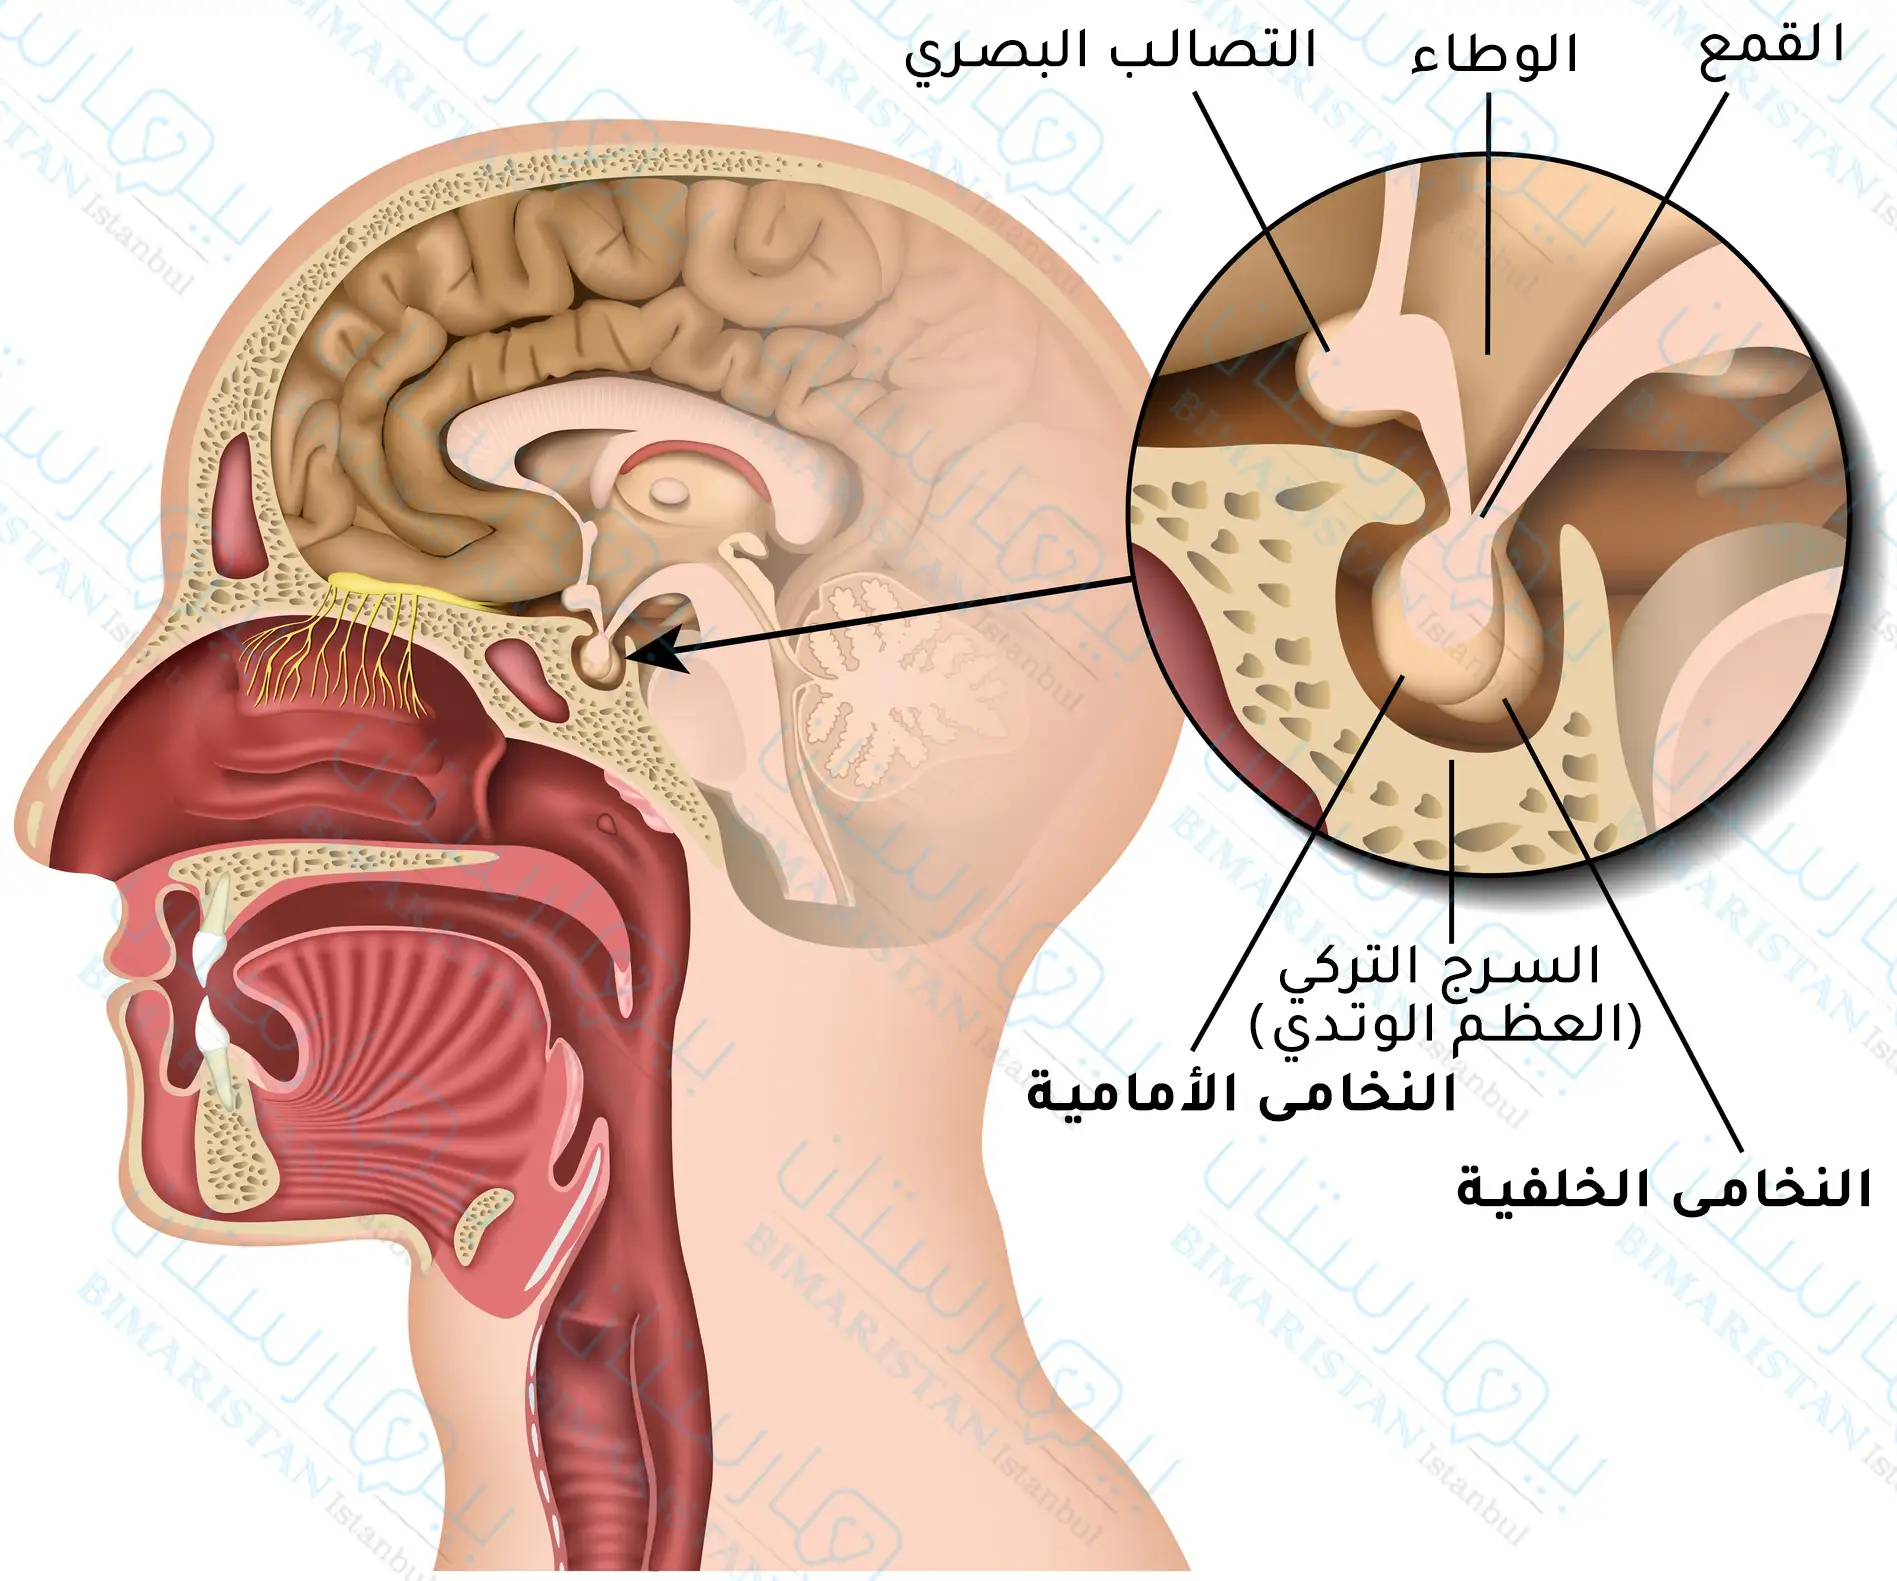 Anatomical location of the pituitary gland